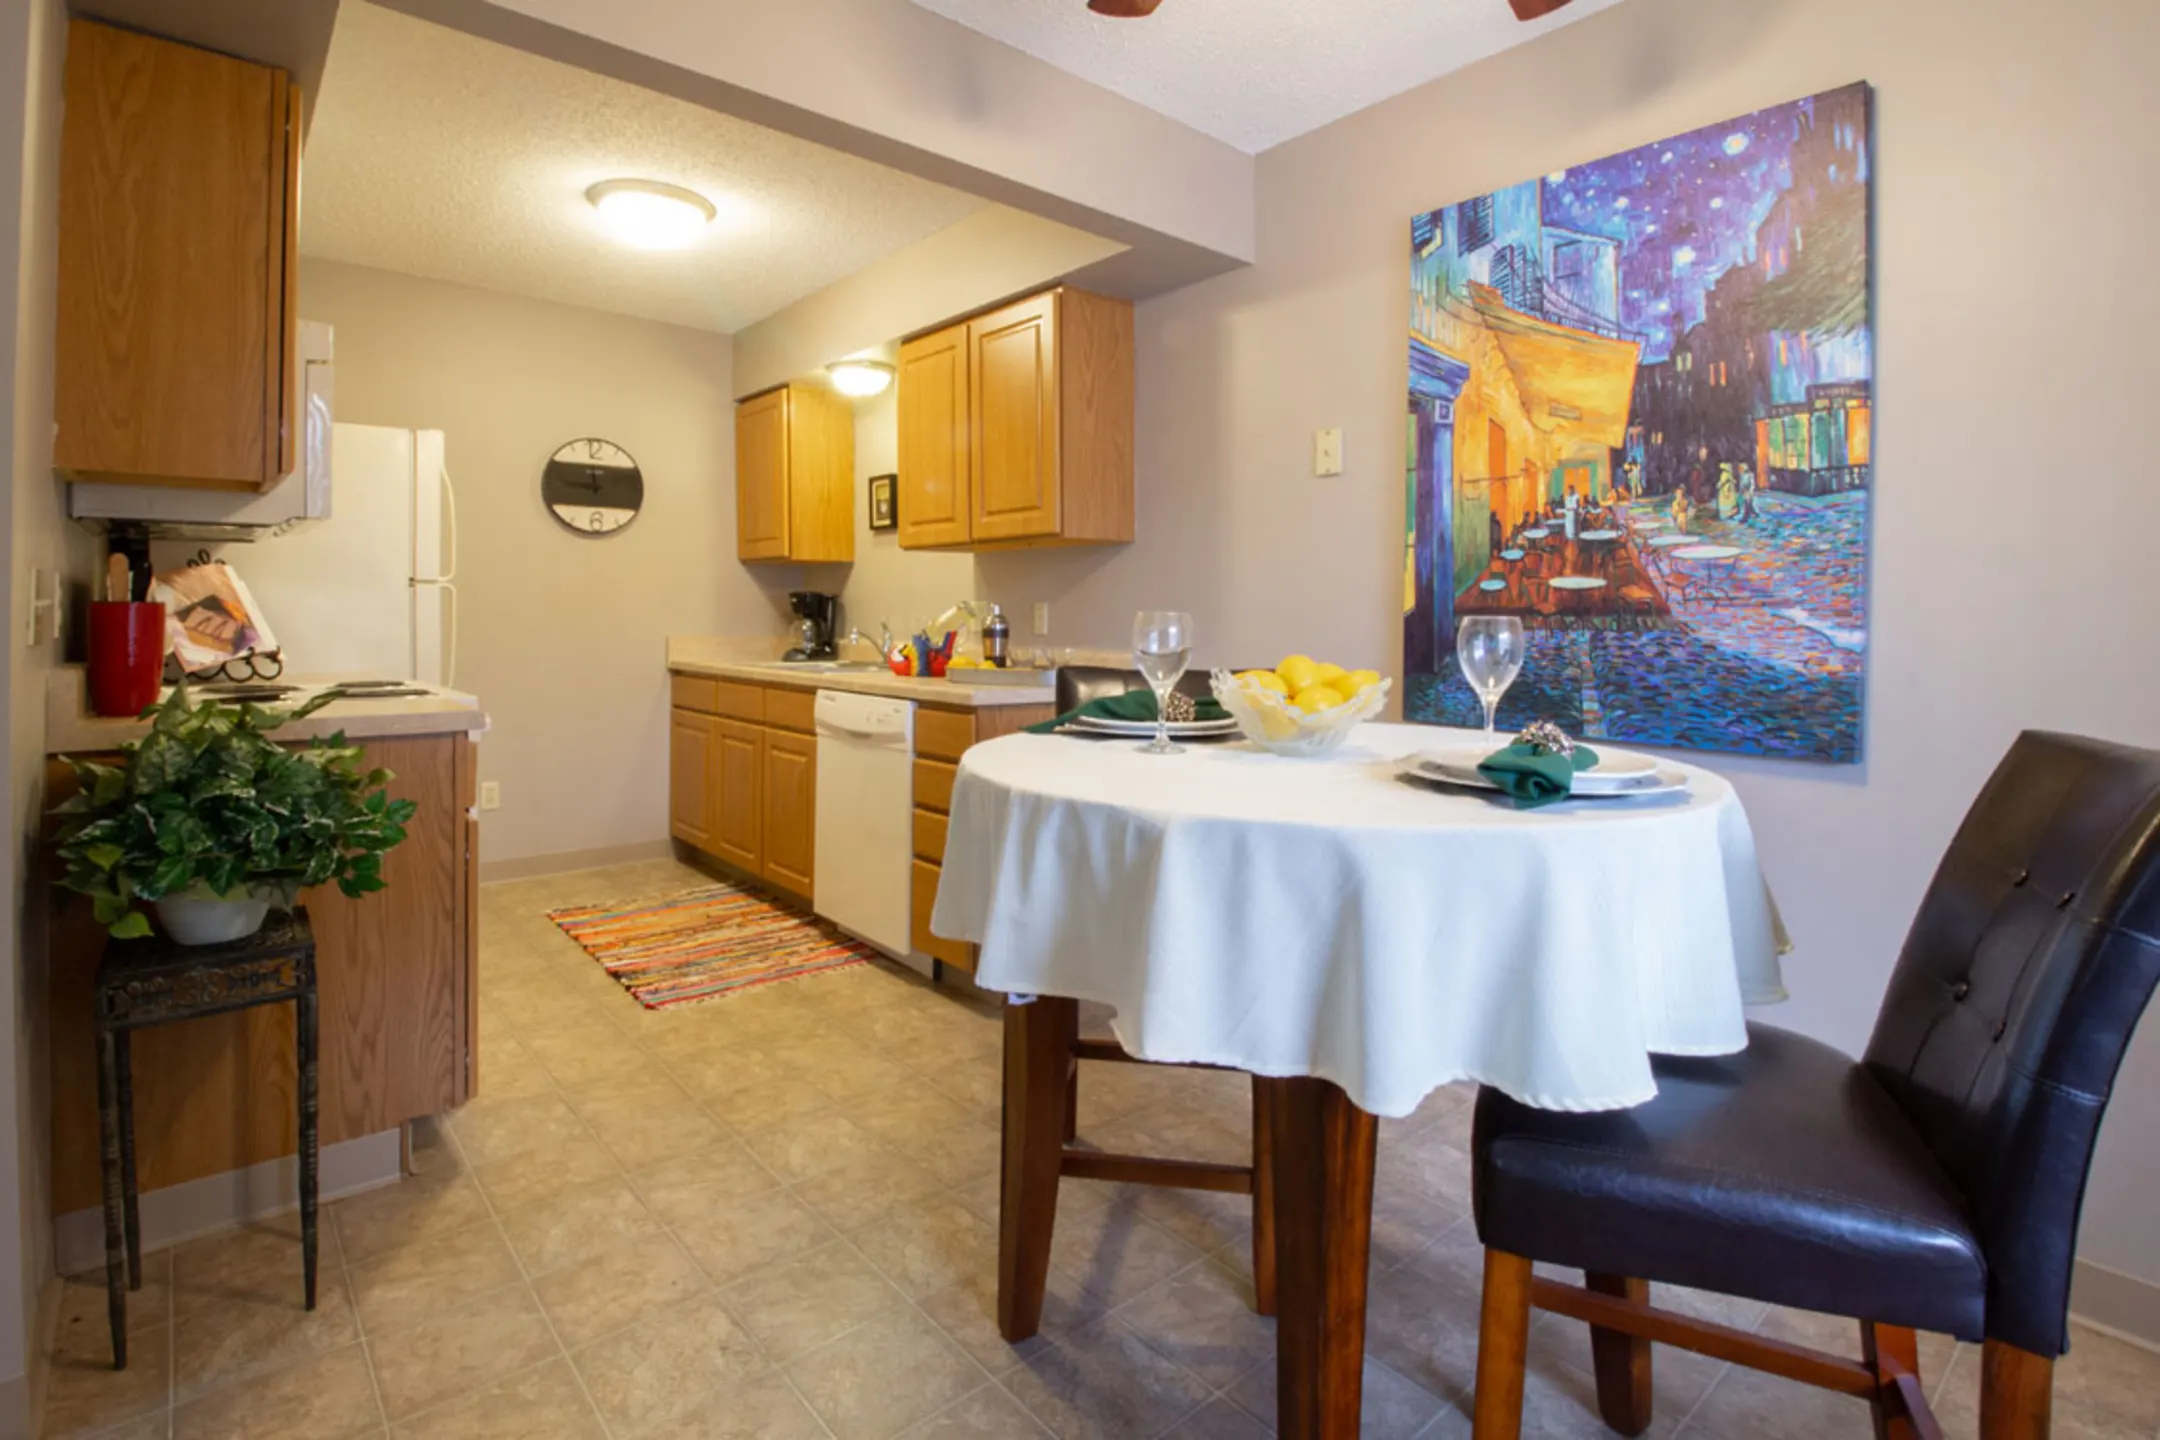 Dining Room - Delaware Crossing Apartments - Ankeny, IA